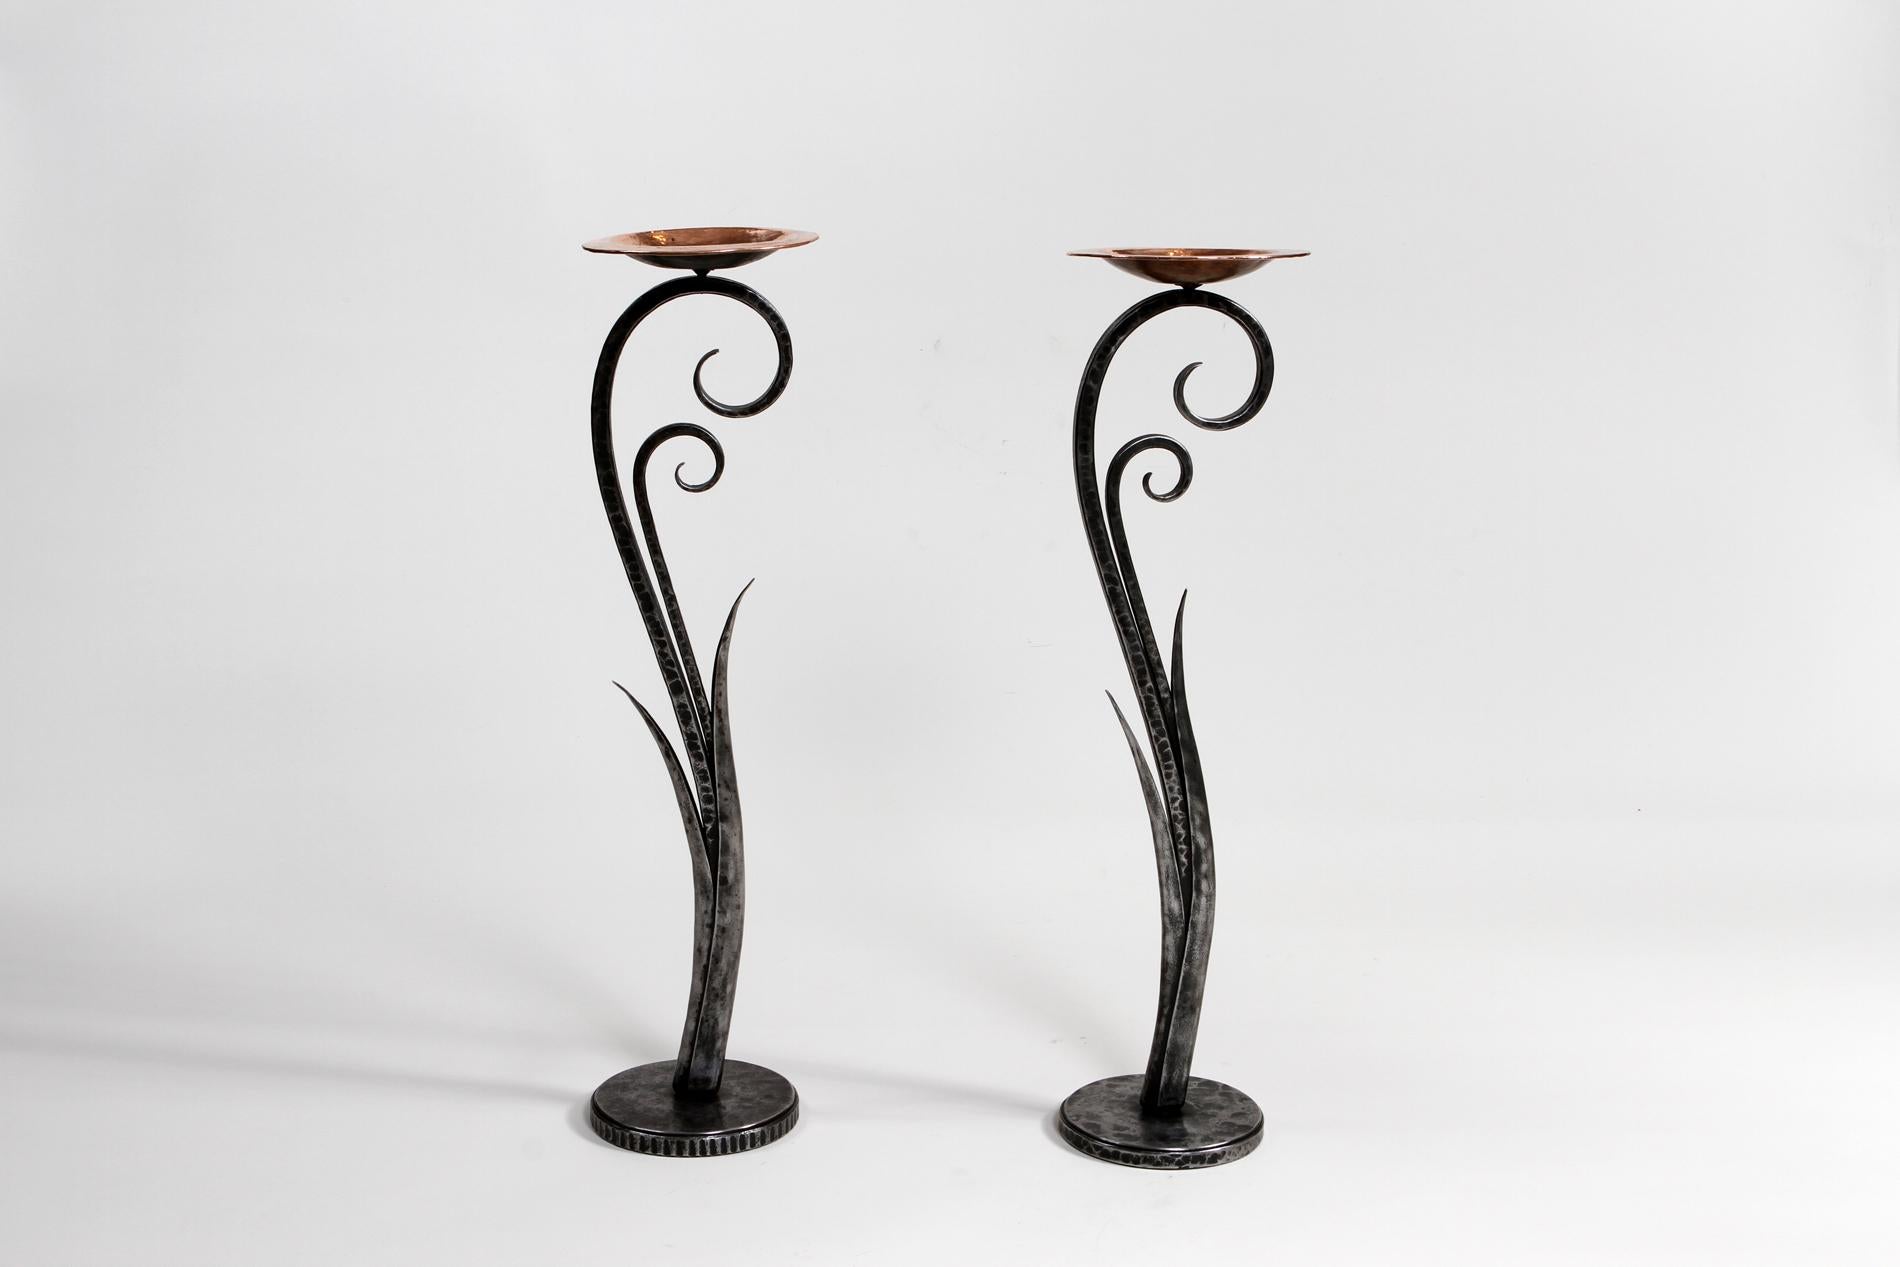 Pair of french Art Deco original ashtrays by sculptor Michel Zadounaïsky circa 1930. They're in wrought iron and top in copper, both signed on the base. The elegant shape is typical from Zadounaïsky style and will be perfect for any tobacco lover